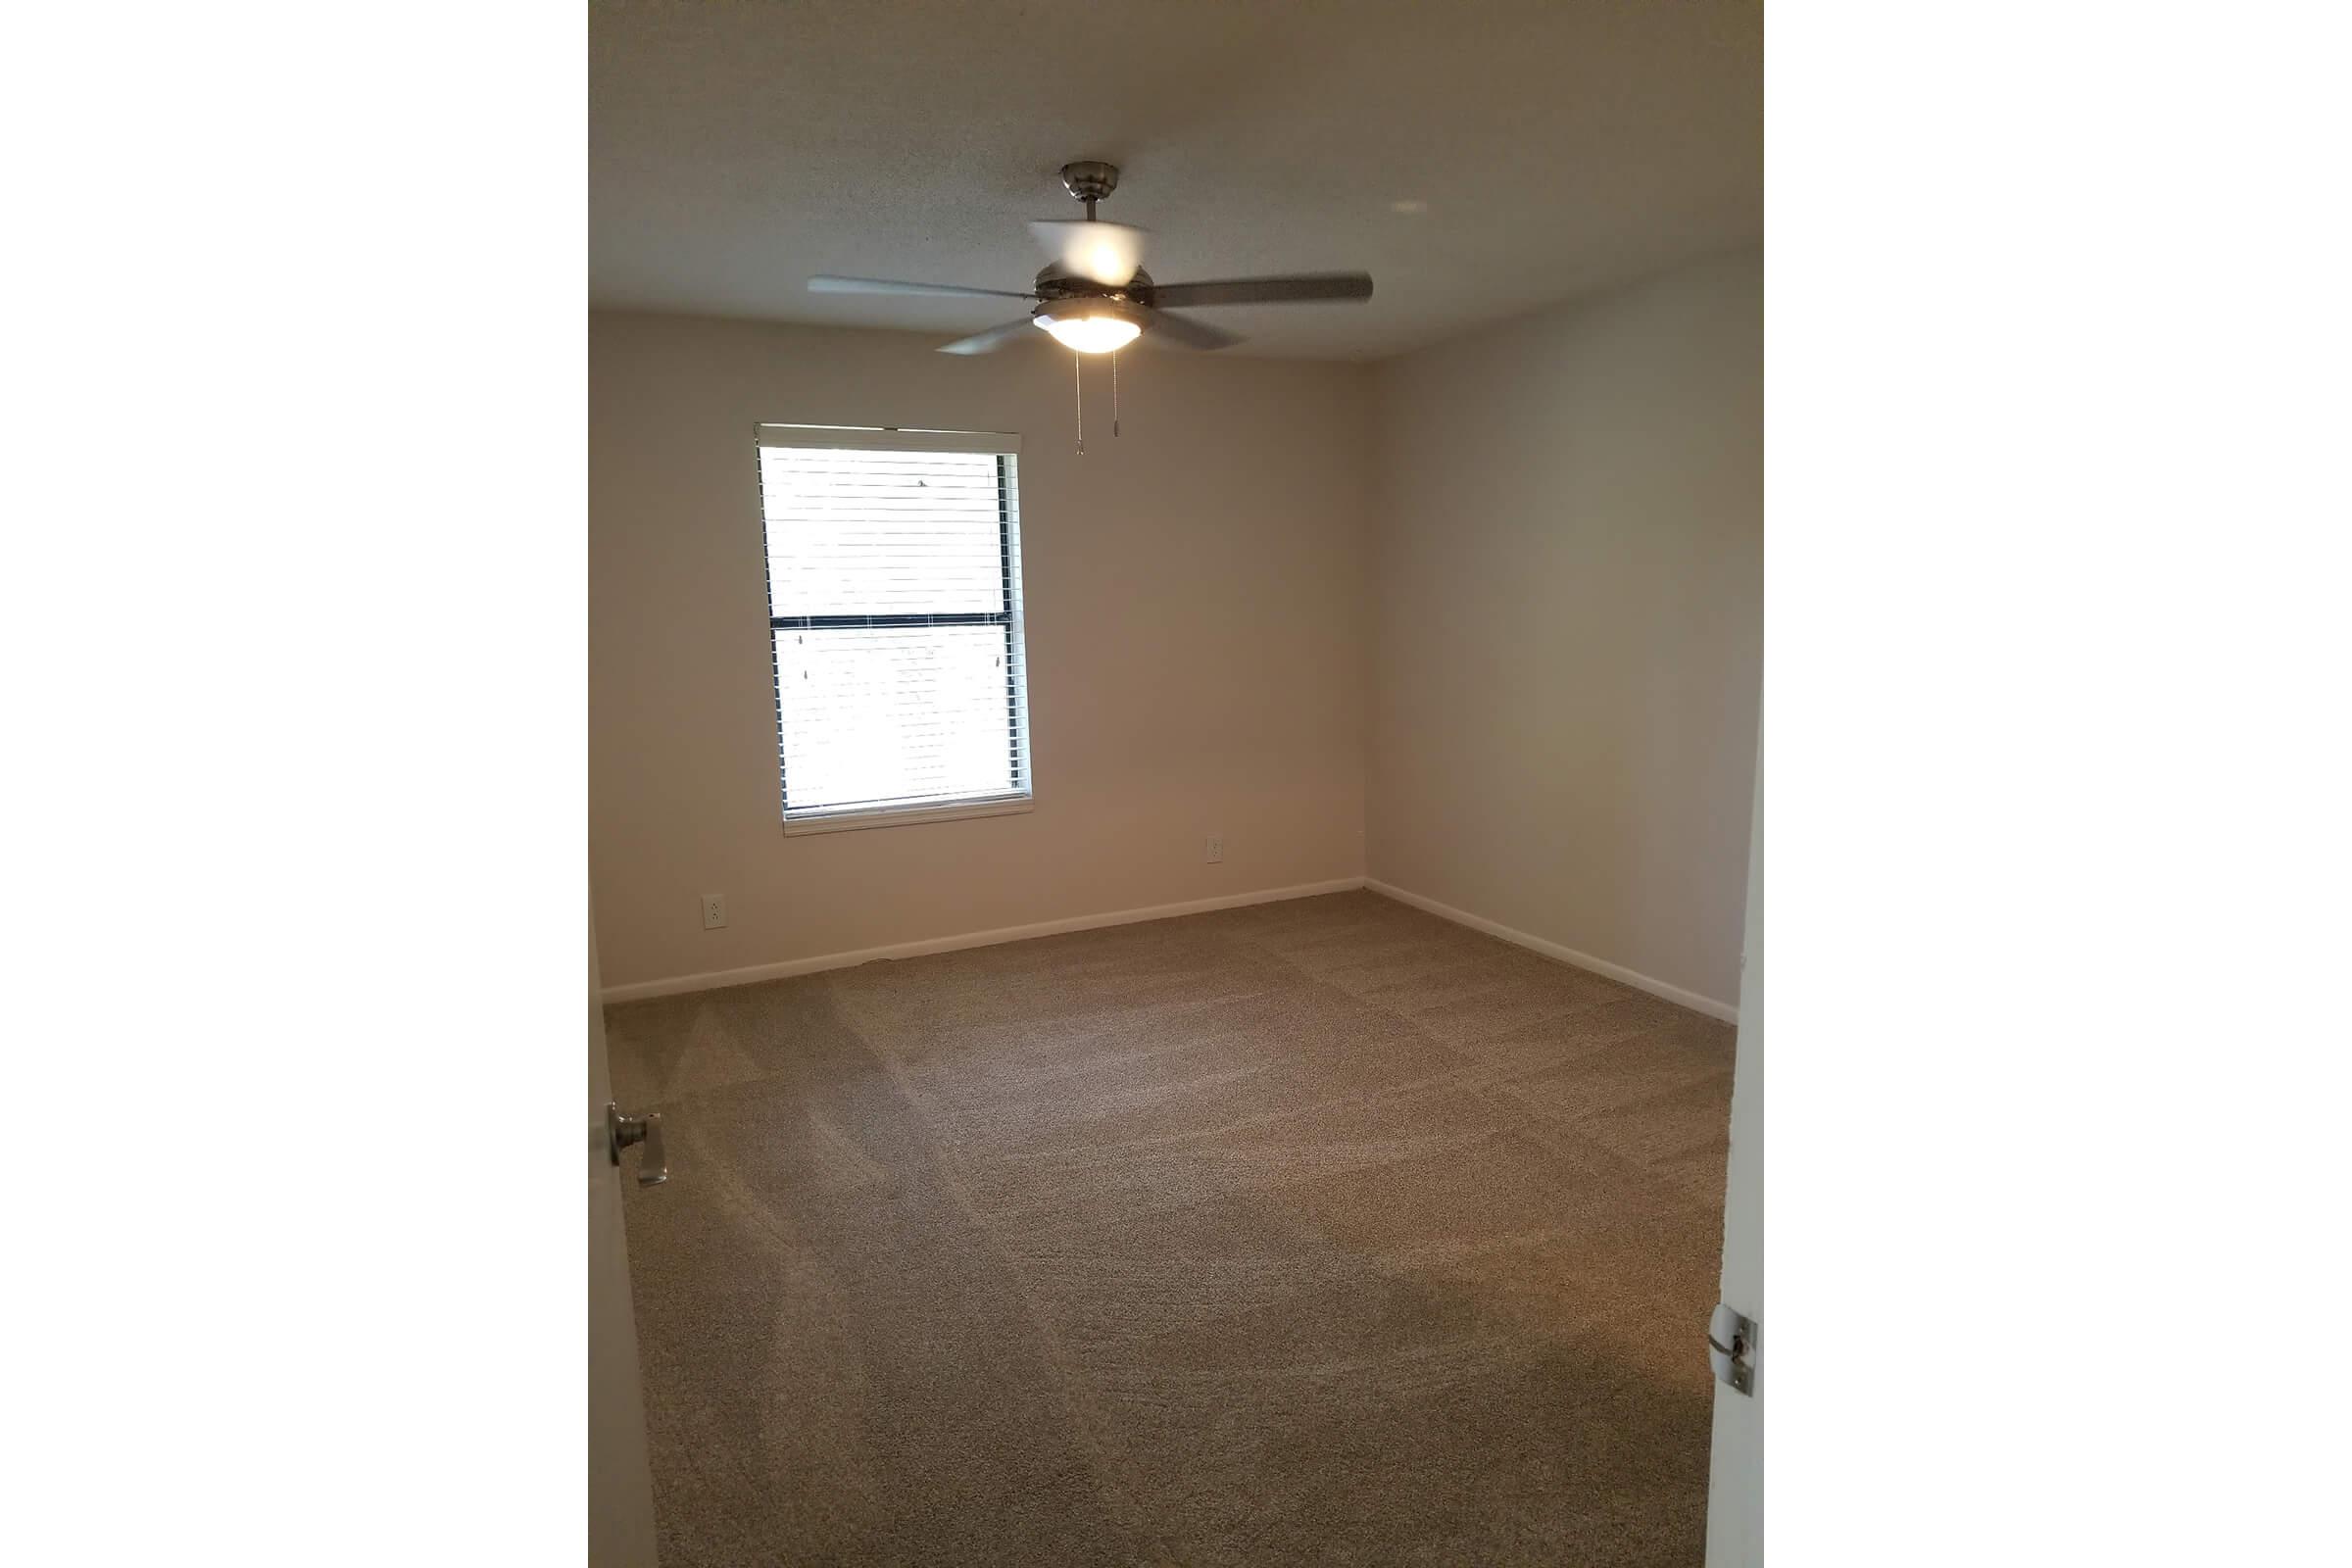 Two bedroom apartment for rent in Murfreesboro, Tennessee